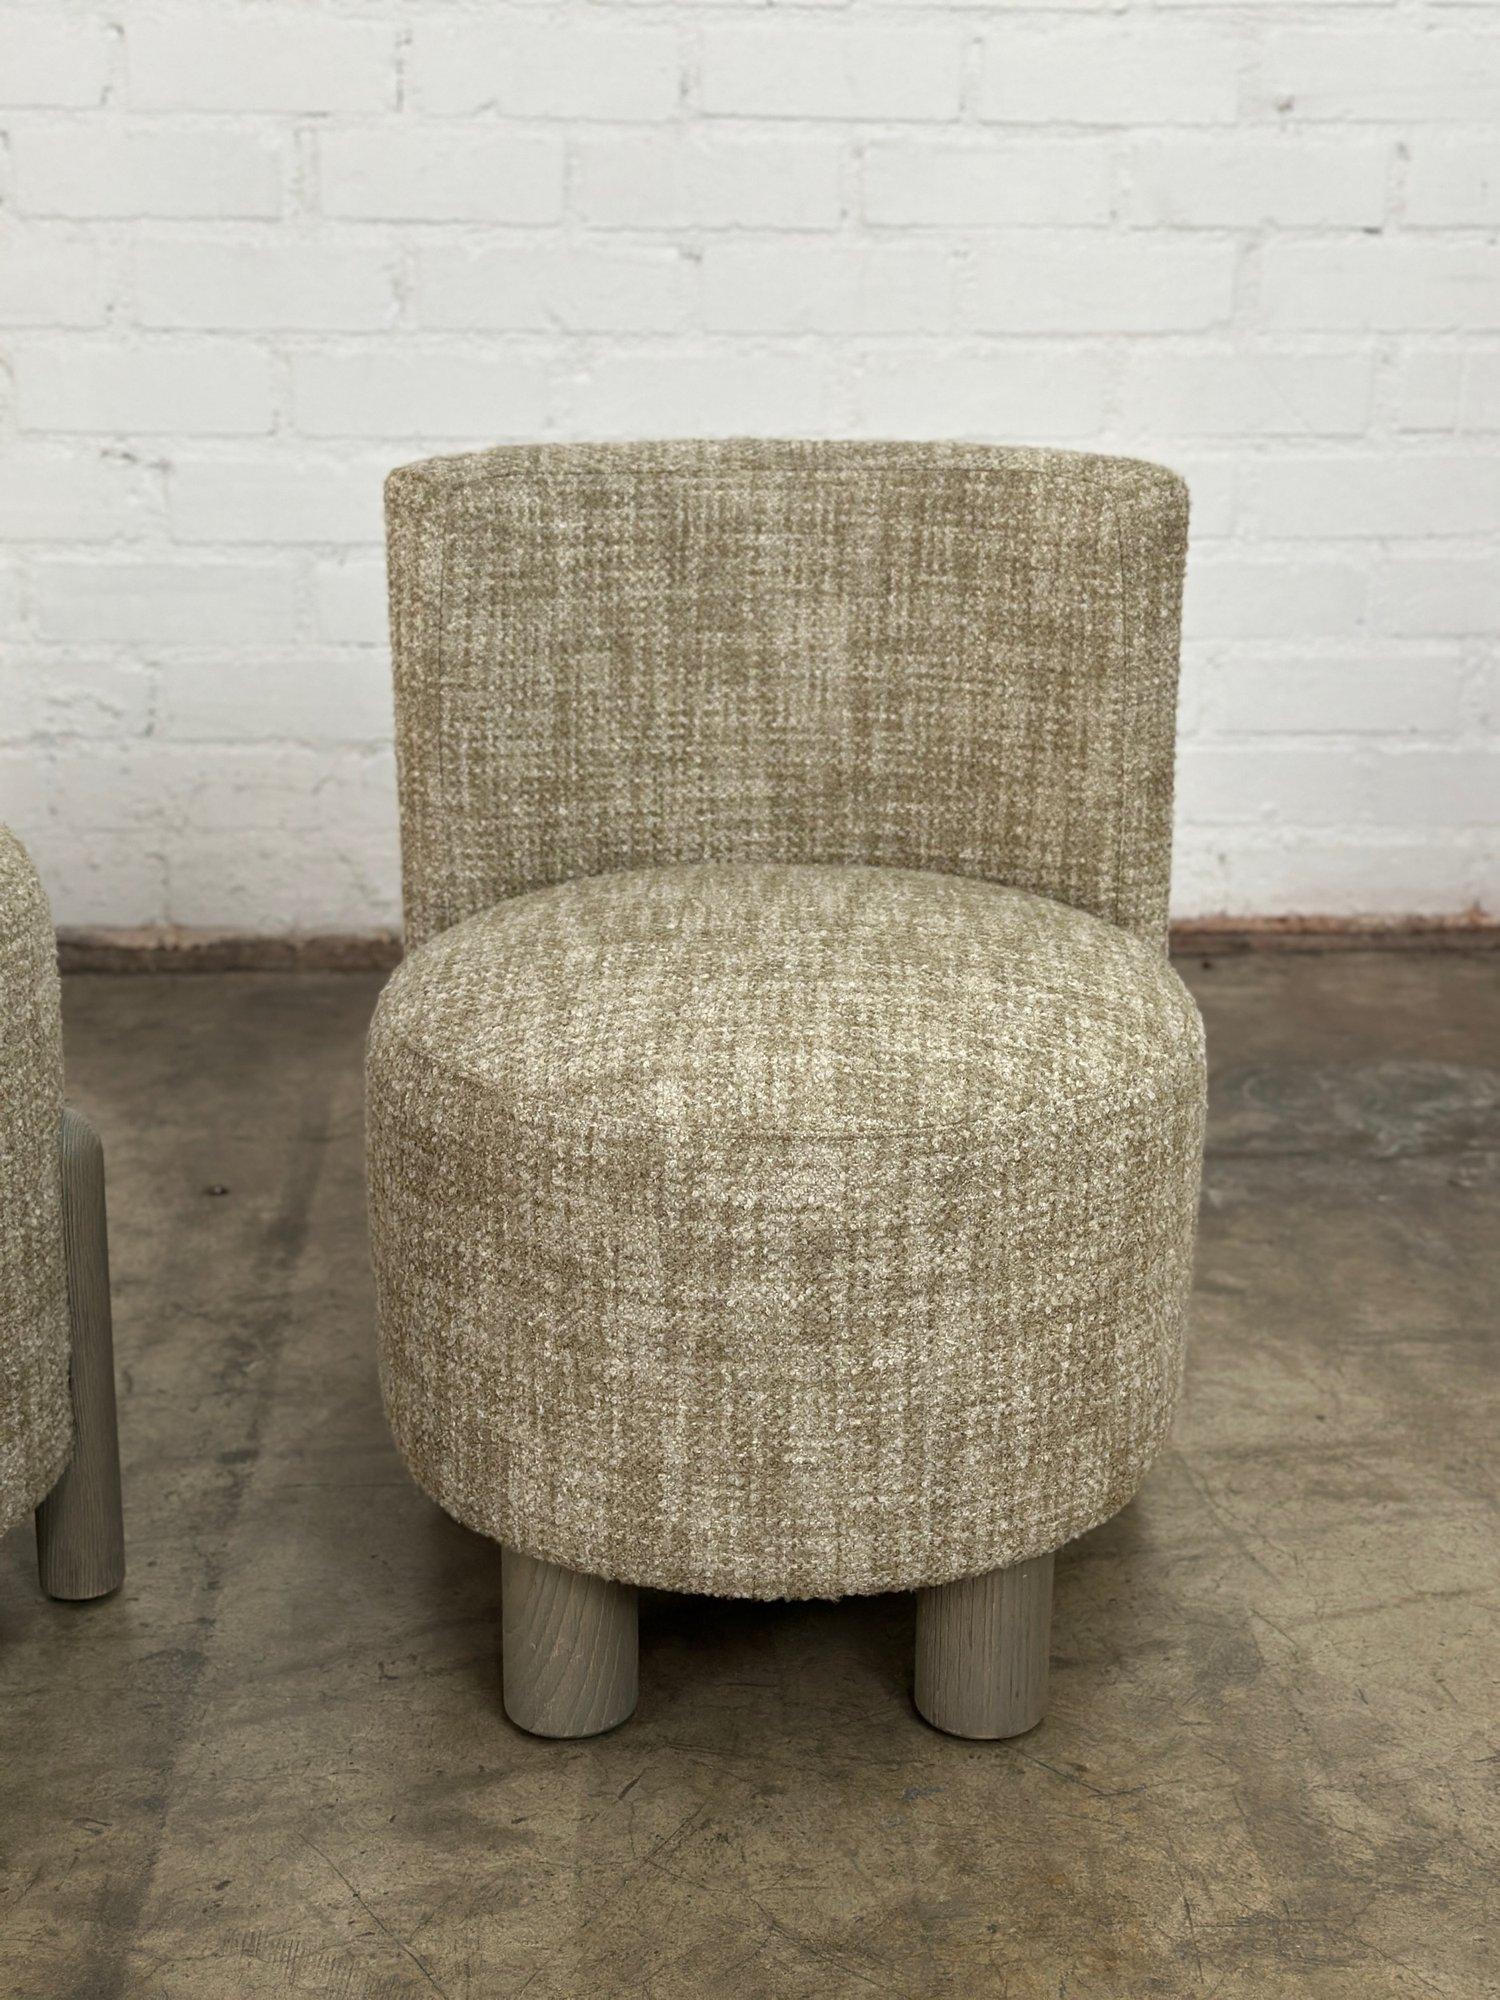 Willoughby Style Stools - Set Of Three For Sale 5